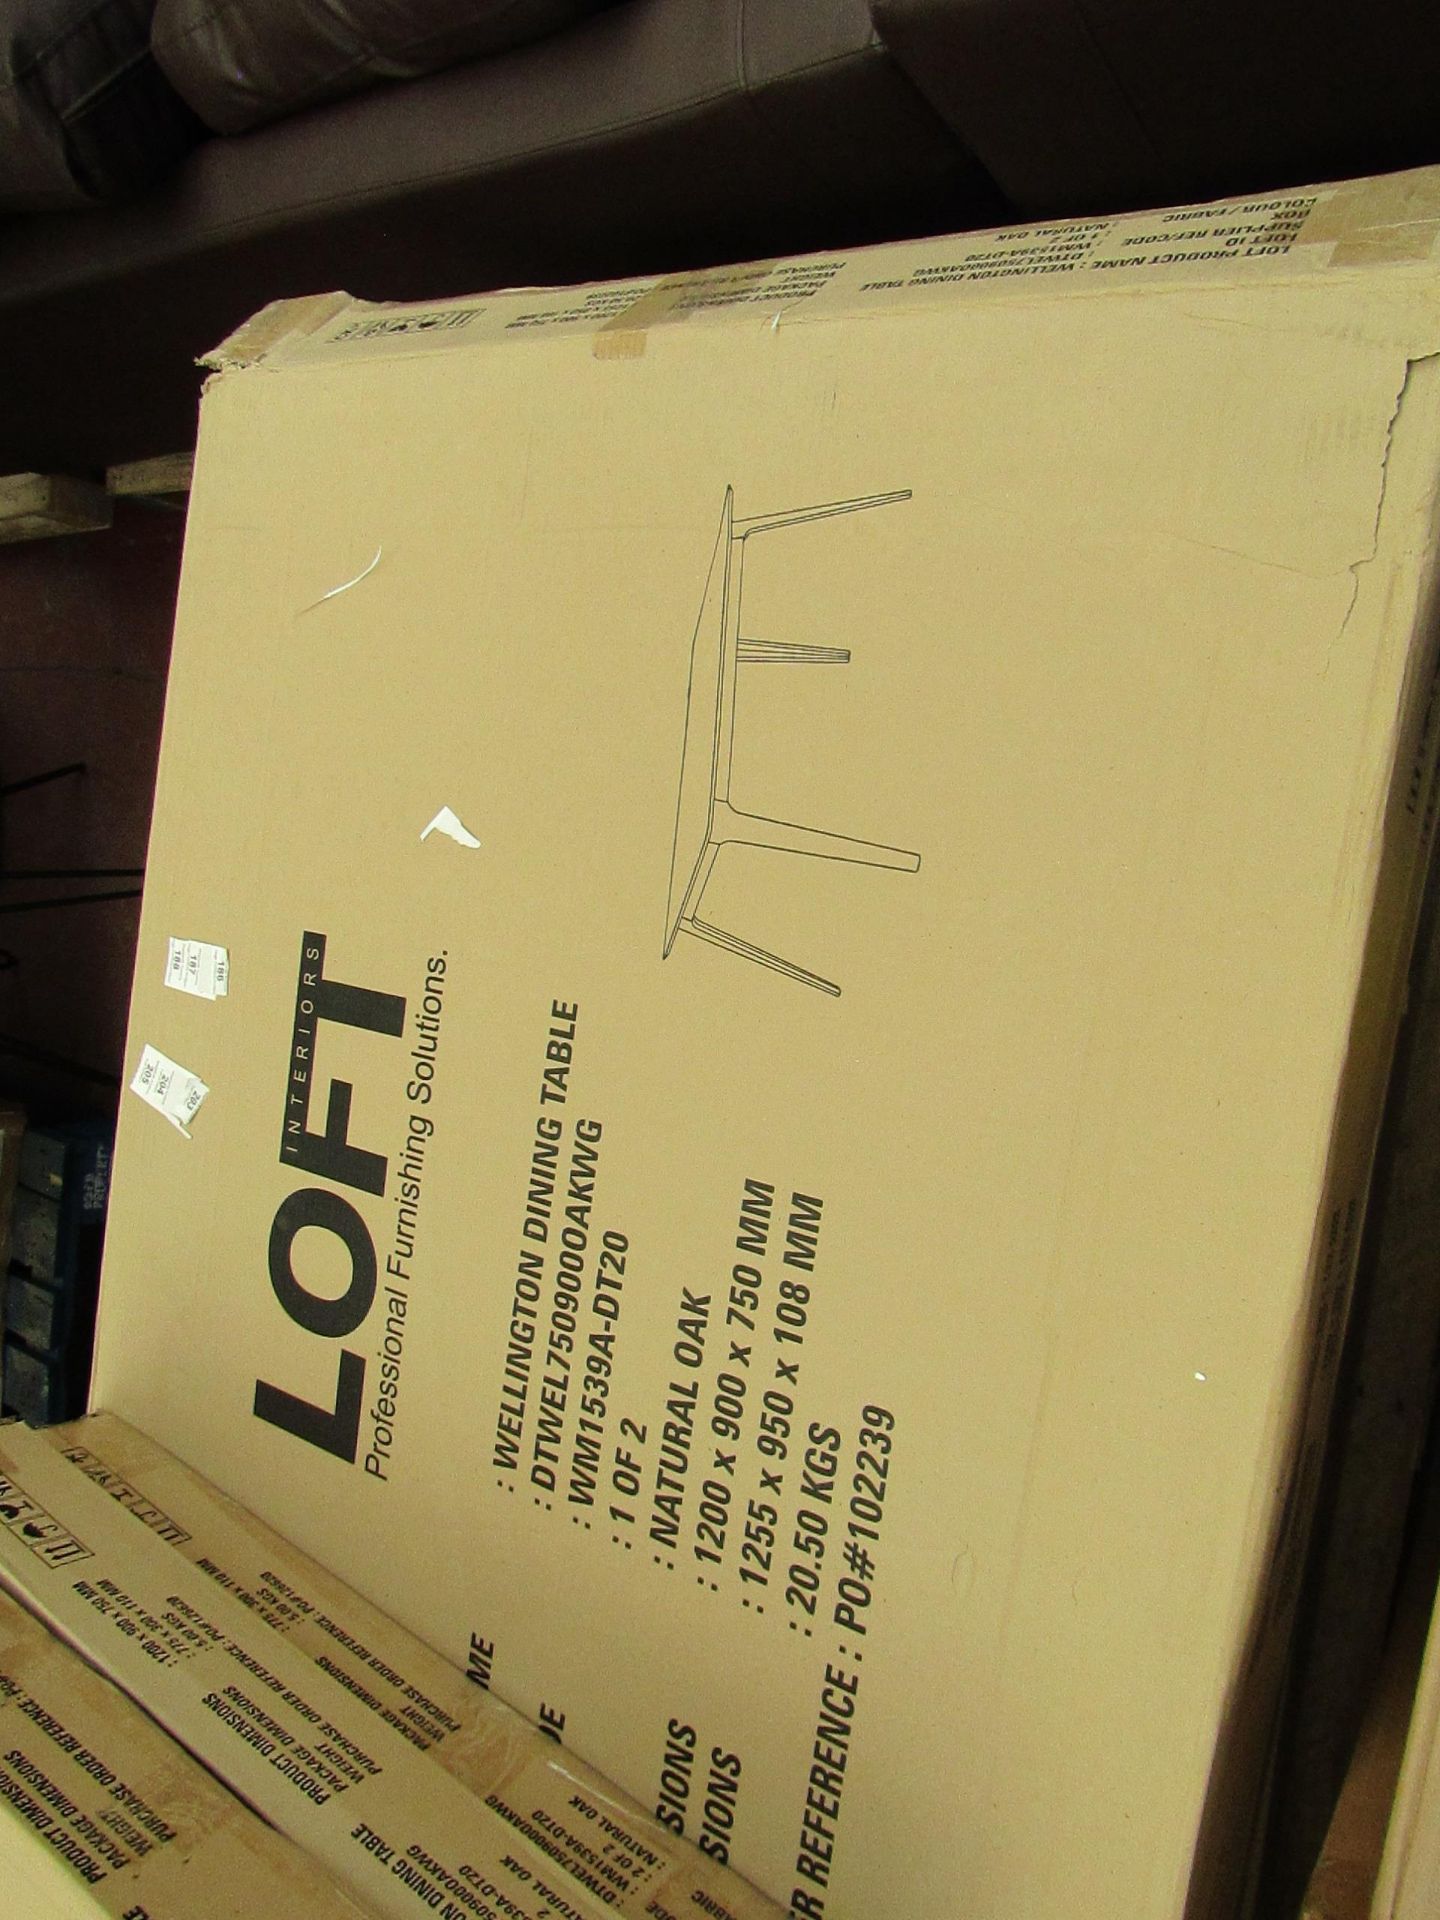 | 1X | LOFT WELLINGTON DINING TABLE | COMES IN 2 BOXES | UNCHECKED & BOXED | RRP œ200 |